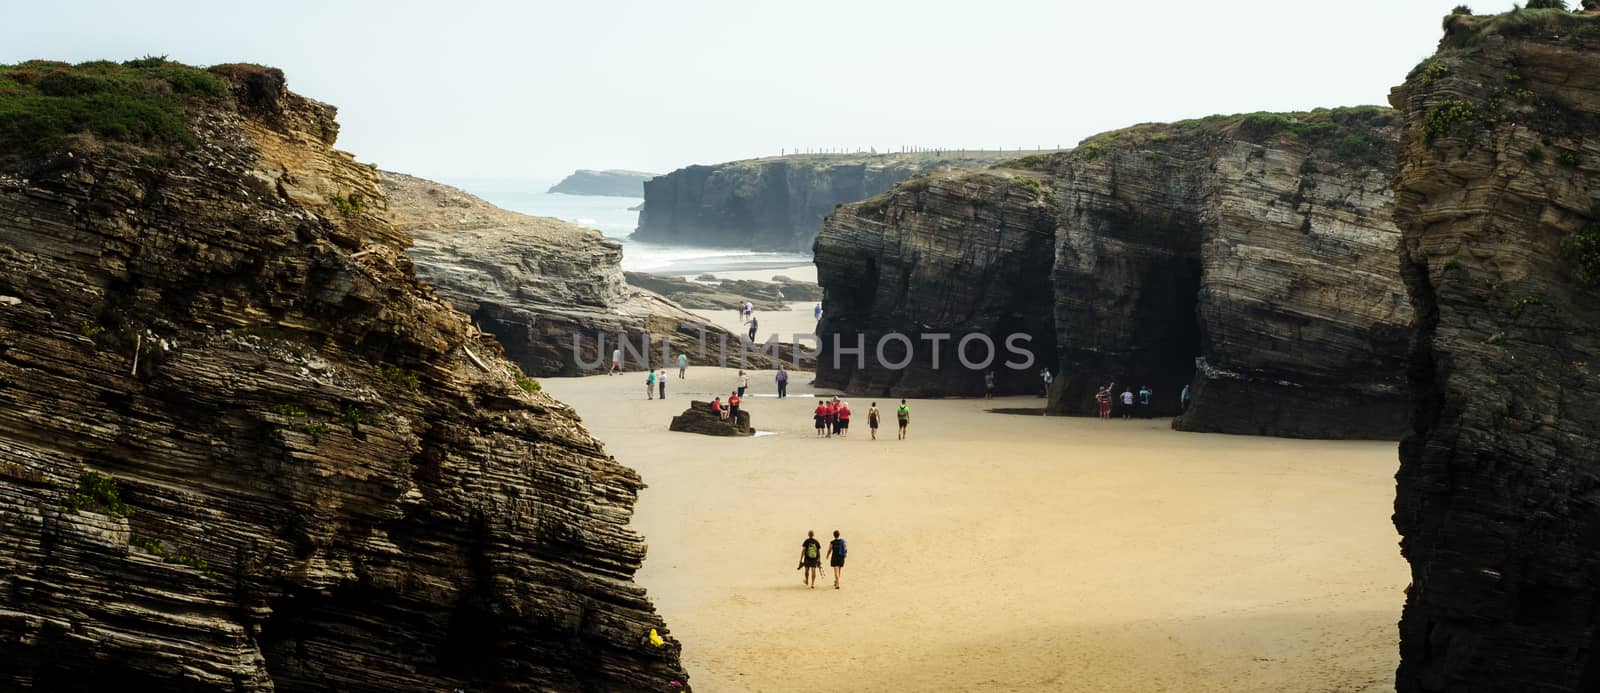 Cathedrals Beach, Cantabria, Spain by mikelju